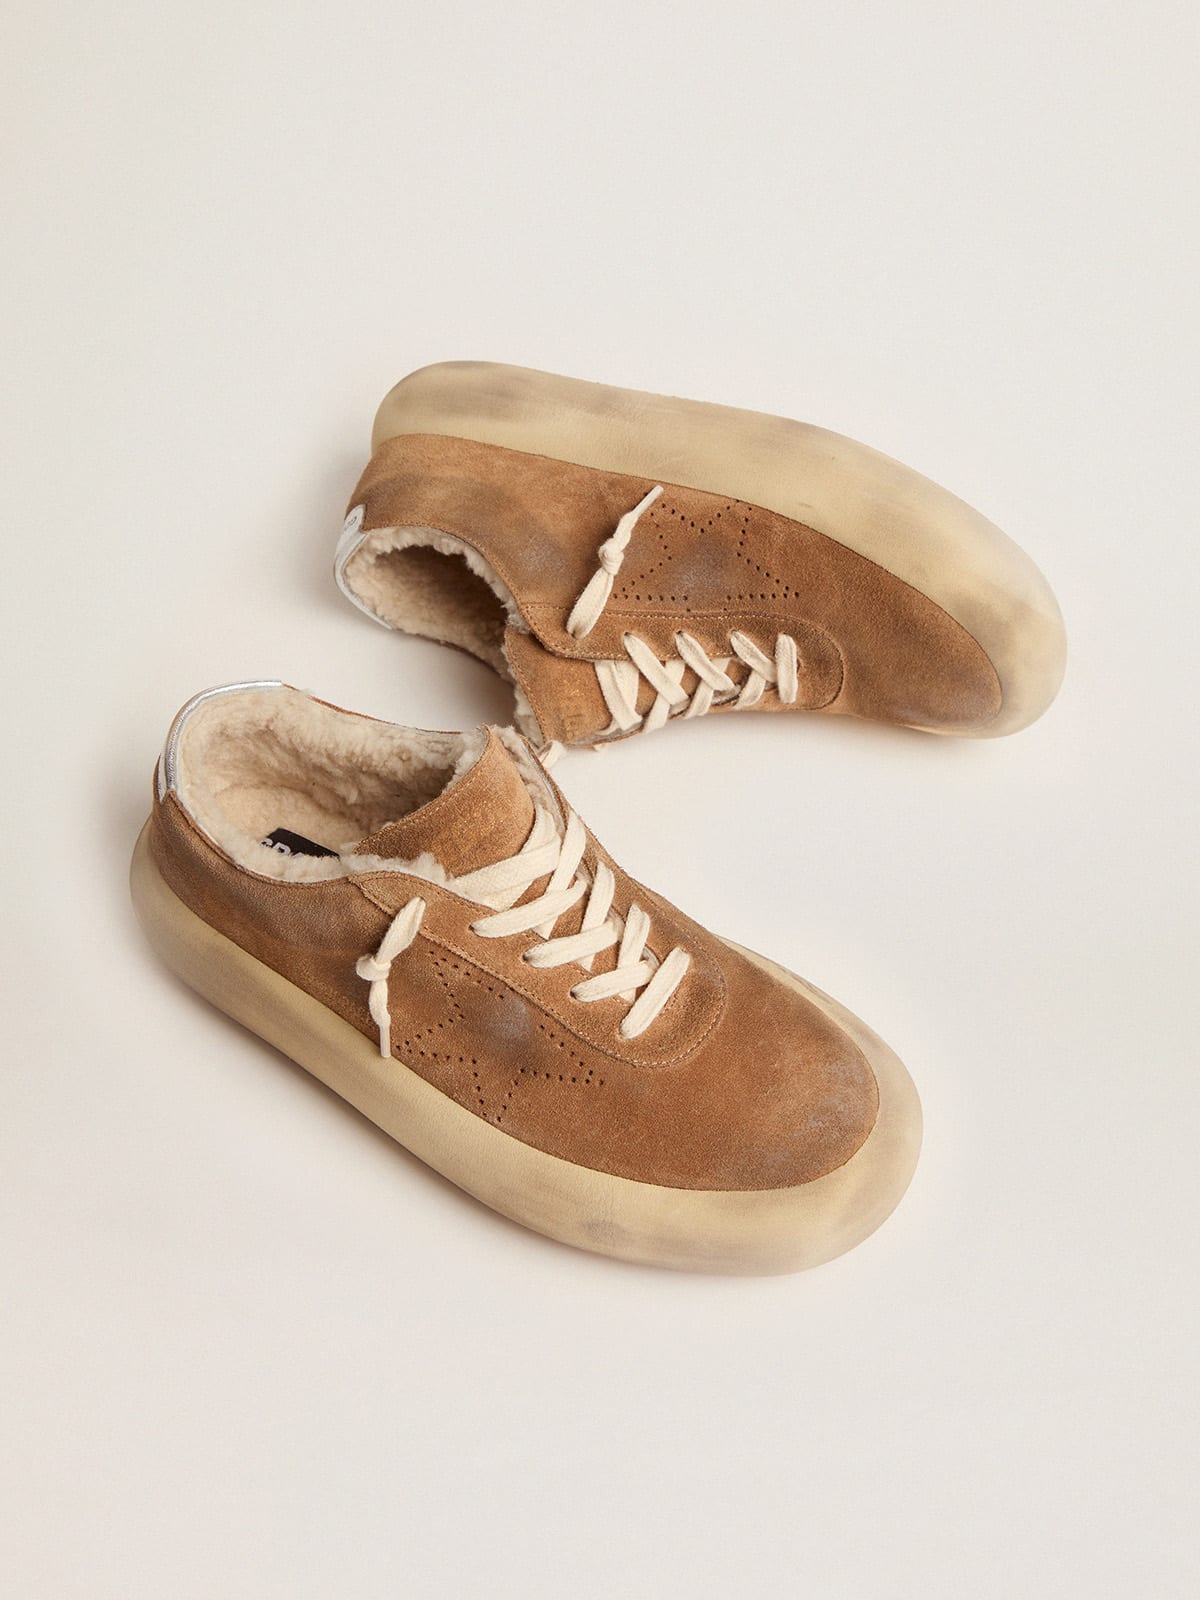 Golden Goose - Women's Space-Star shoes in tobacco-colored suede with shearling lining in 